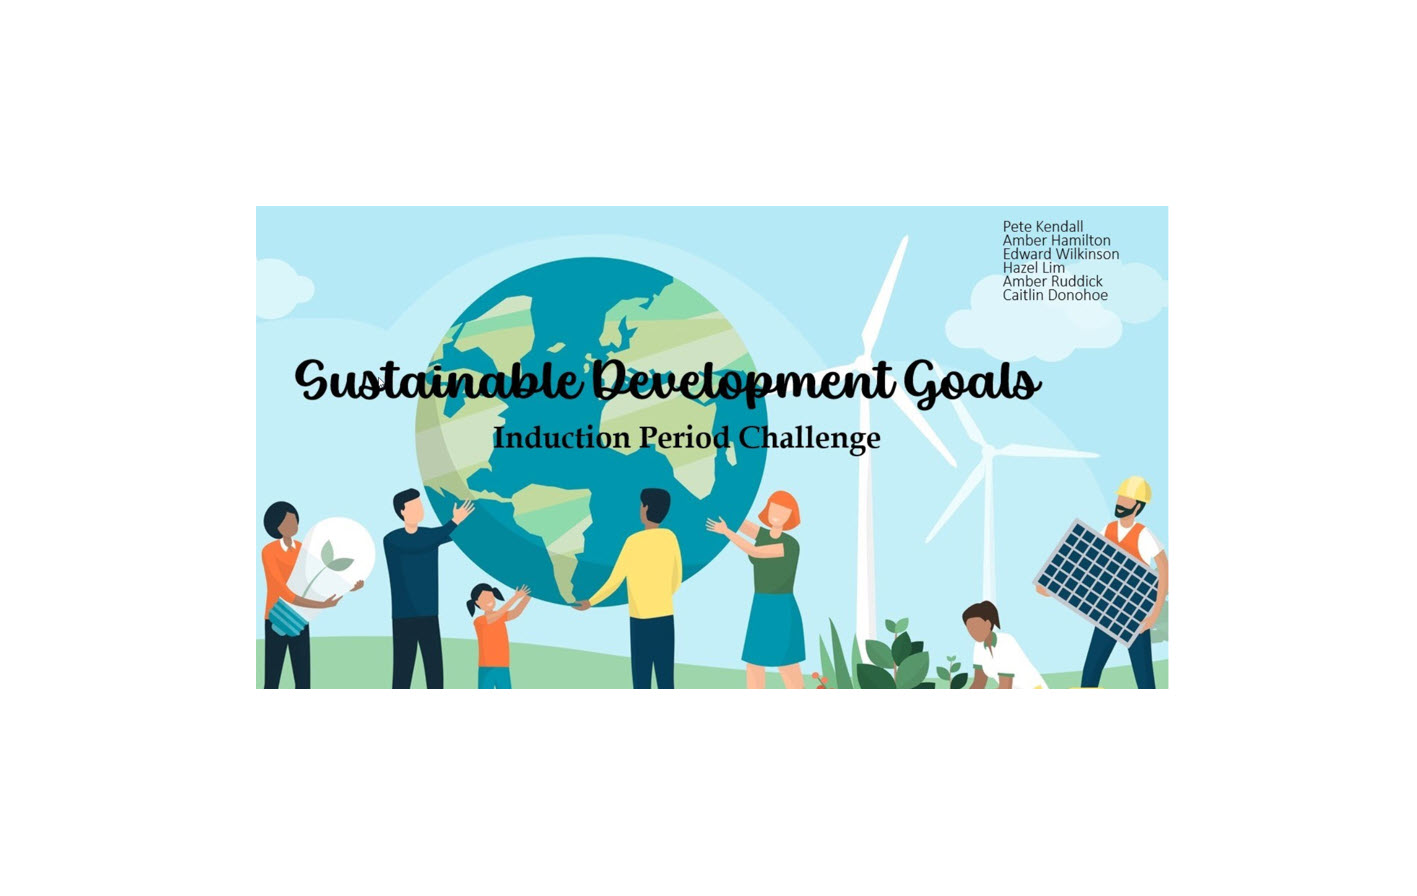 An image of the title image of one of the Newcastle University Team's Induction Period Challenge presentation. It shows a group of people holding planet Earth in their hands, while other people hold, a light bulb, a solar panel and someone kneeling down gardening. There are wind turbines in the background.